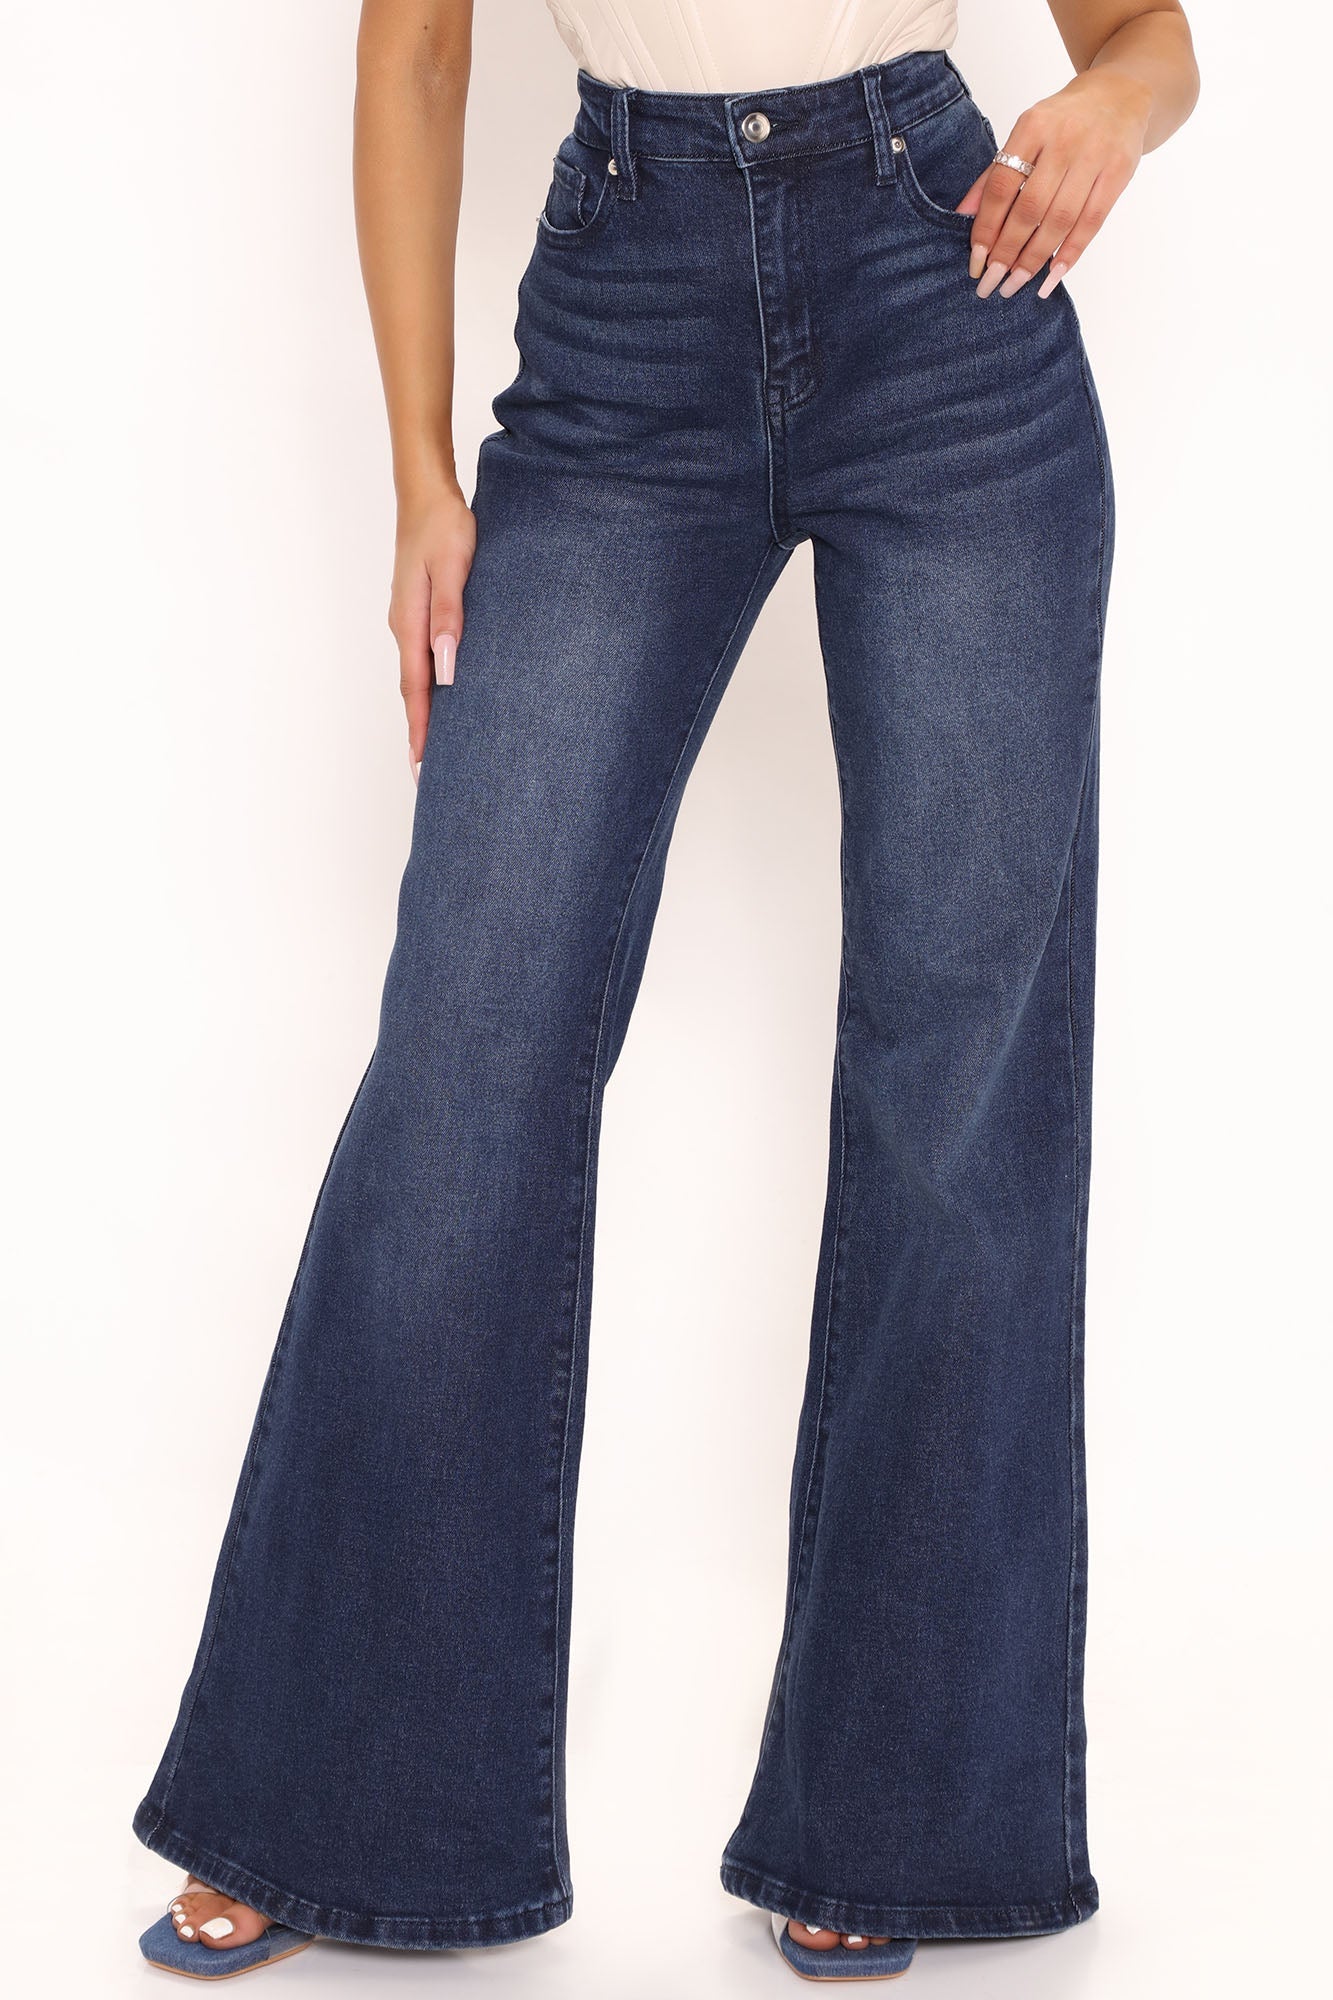 Love Letters Recycled High Waist Wide Leg Jeans - Dark Wash Ins Street